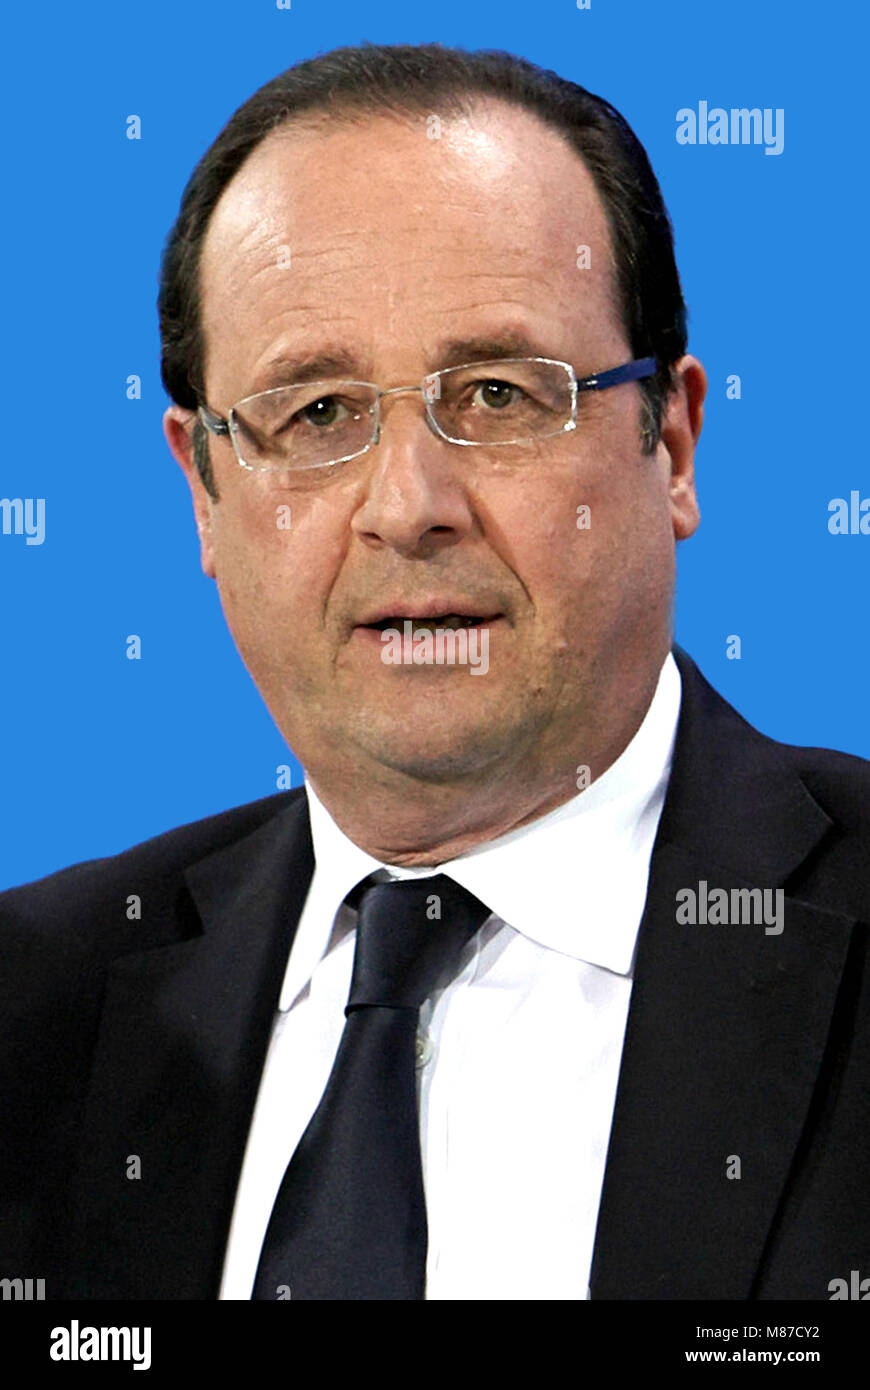 Francois Hollande - *12.08.1954: President of the French Republic from 2012 to 2017 - France. Stock Photo